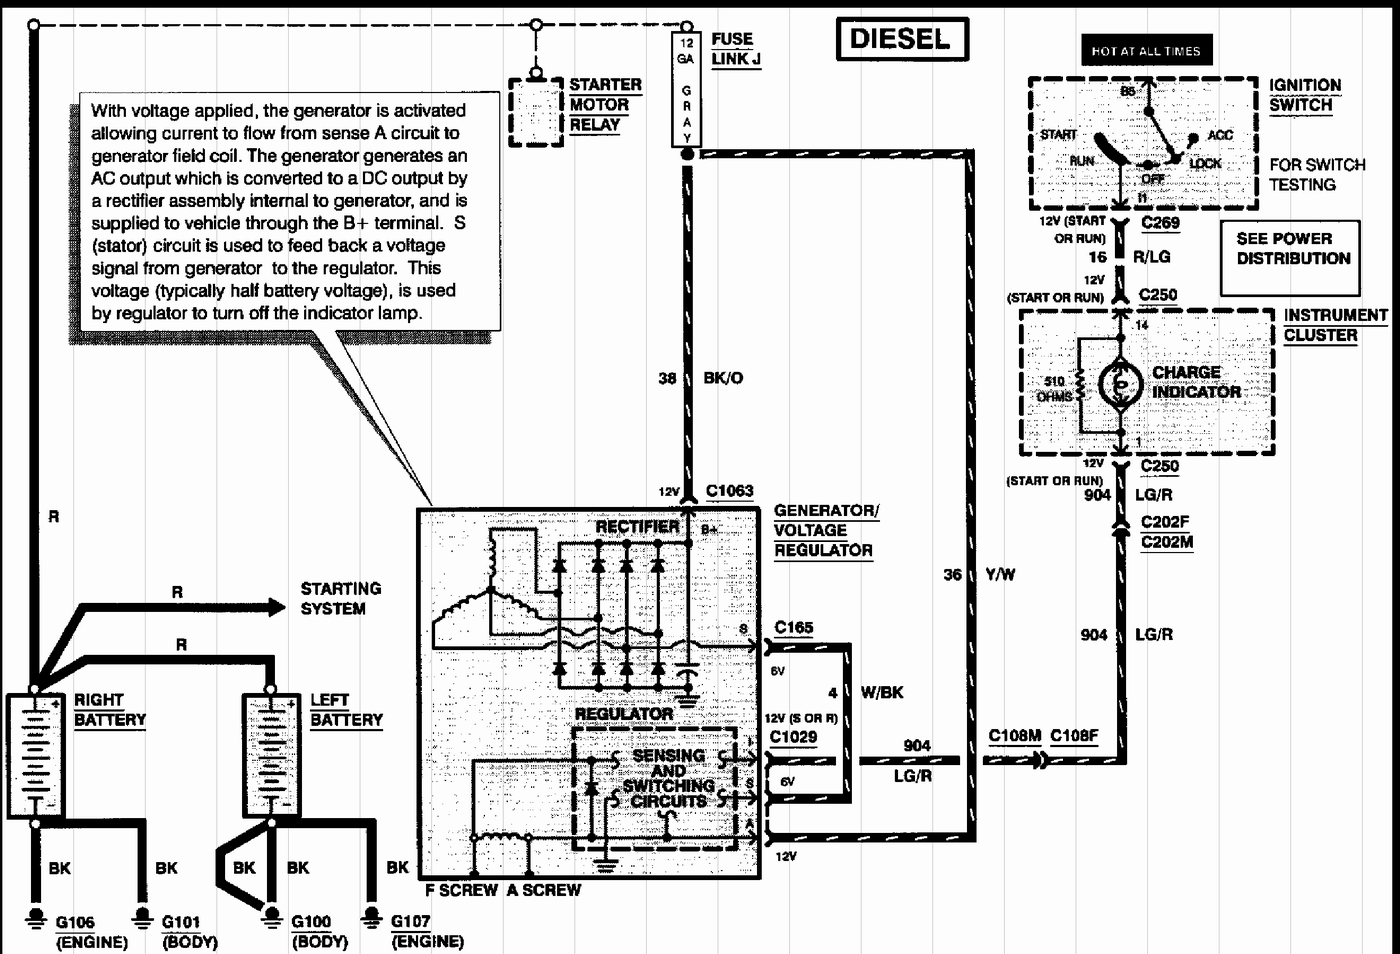 I Need A Wiring Diagram For A 97 F350 7.3 Powerstroke With E4Od - 7.3 Powerstroke Wiring Diagram